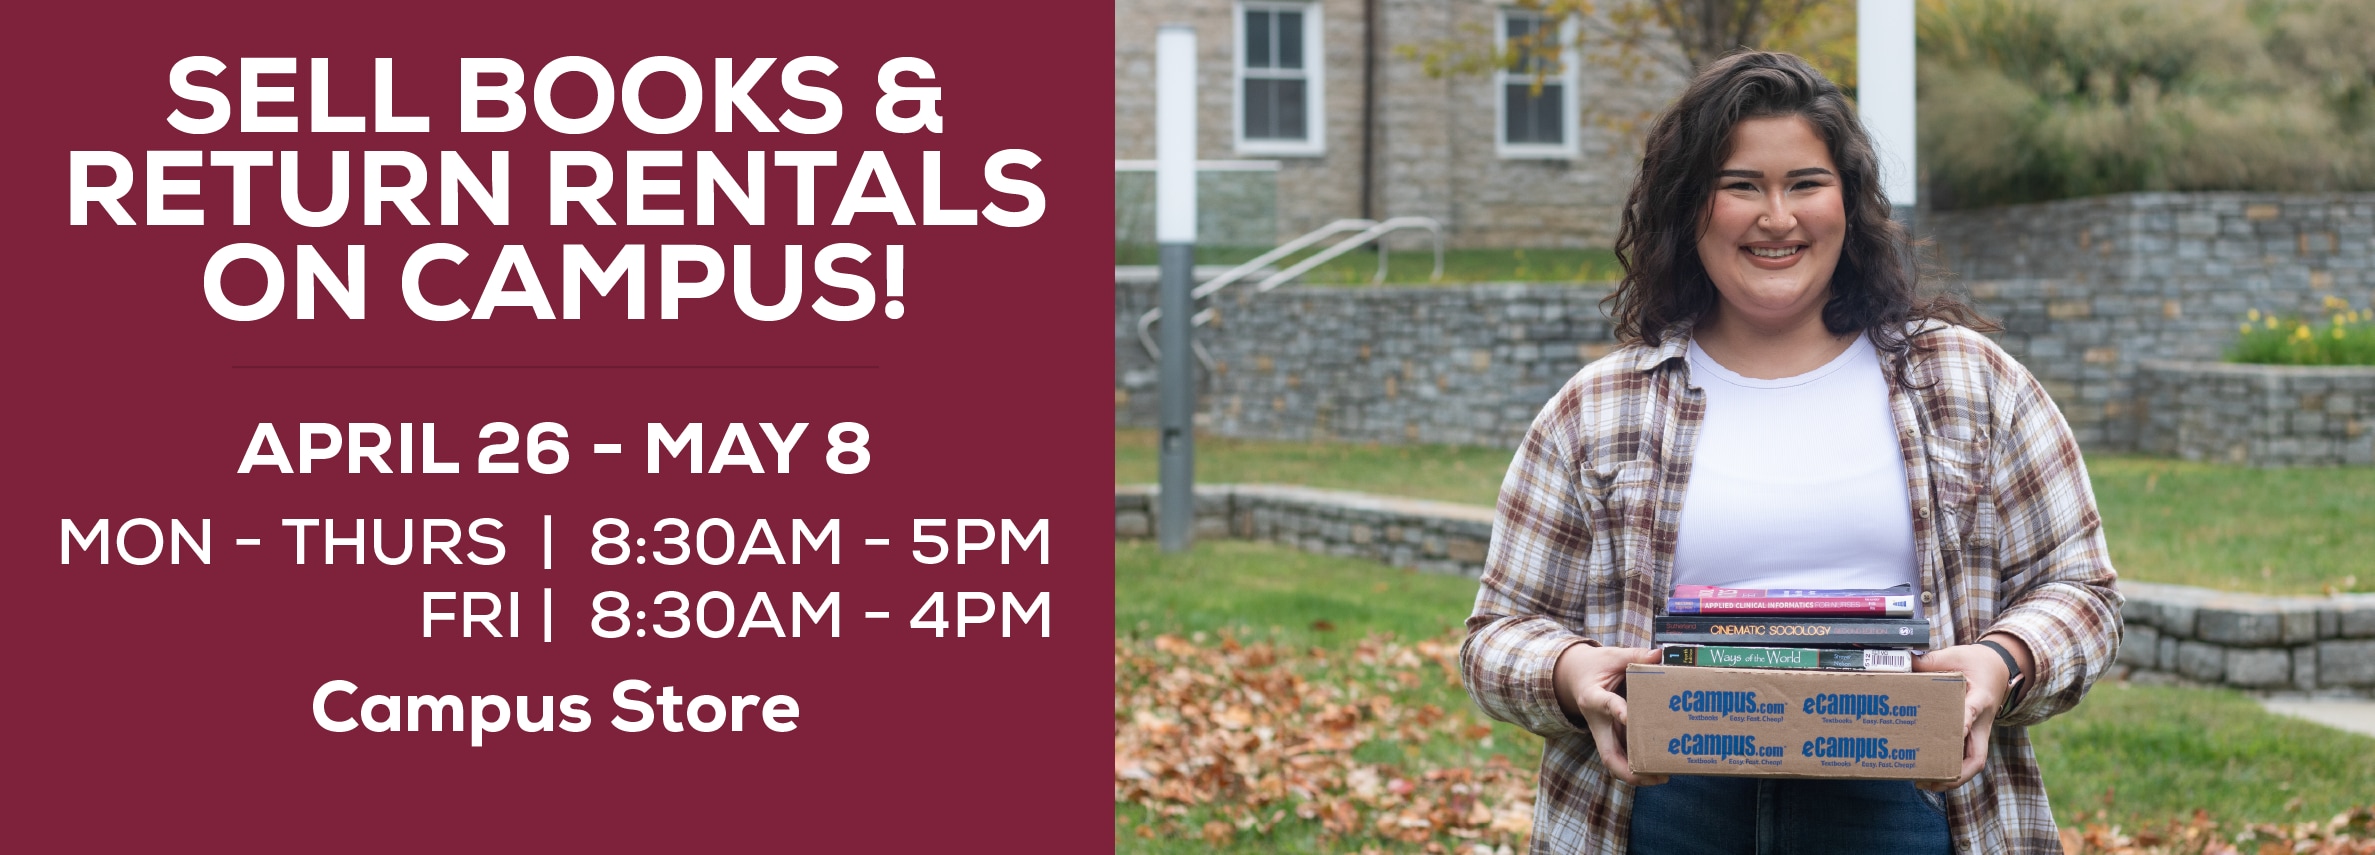 Sell books and return rentals on campus! April 26 - May 8. Monday through Thursday: 8:30am to 5pm. Friday: 8:30am to 4pm. Campus Store.